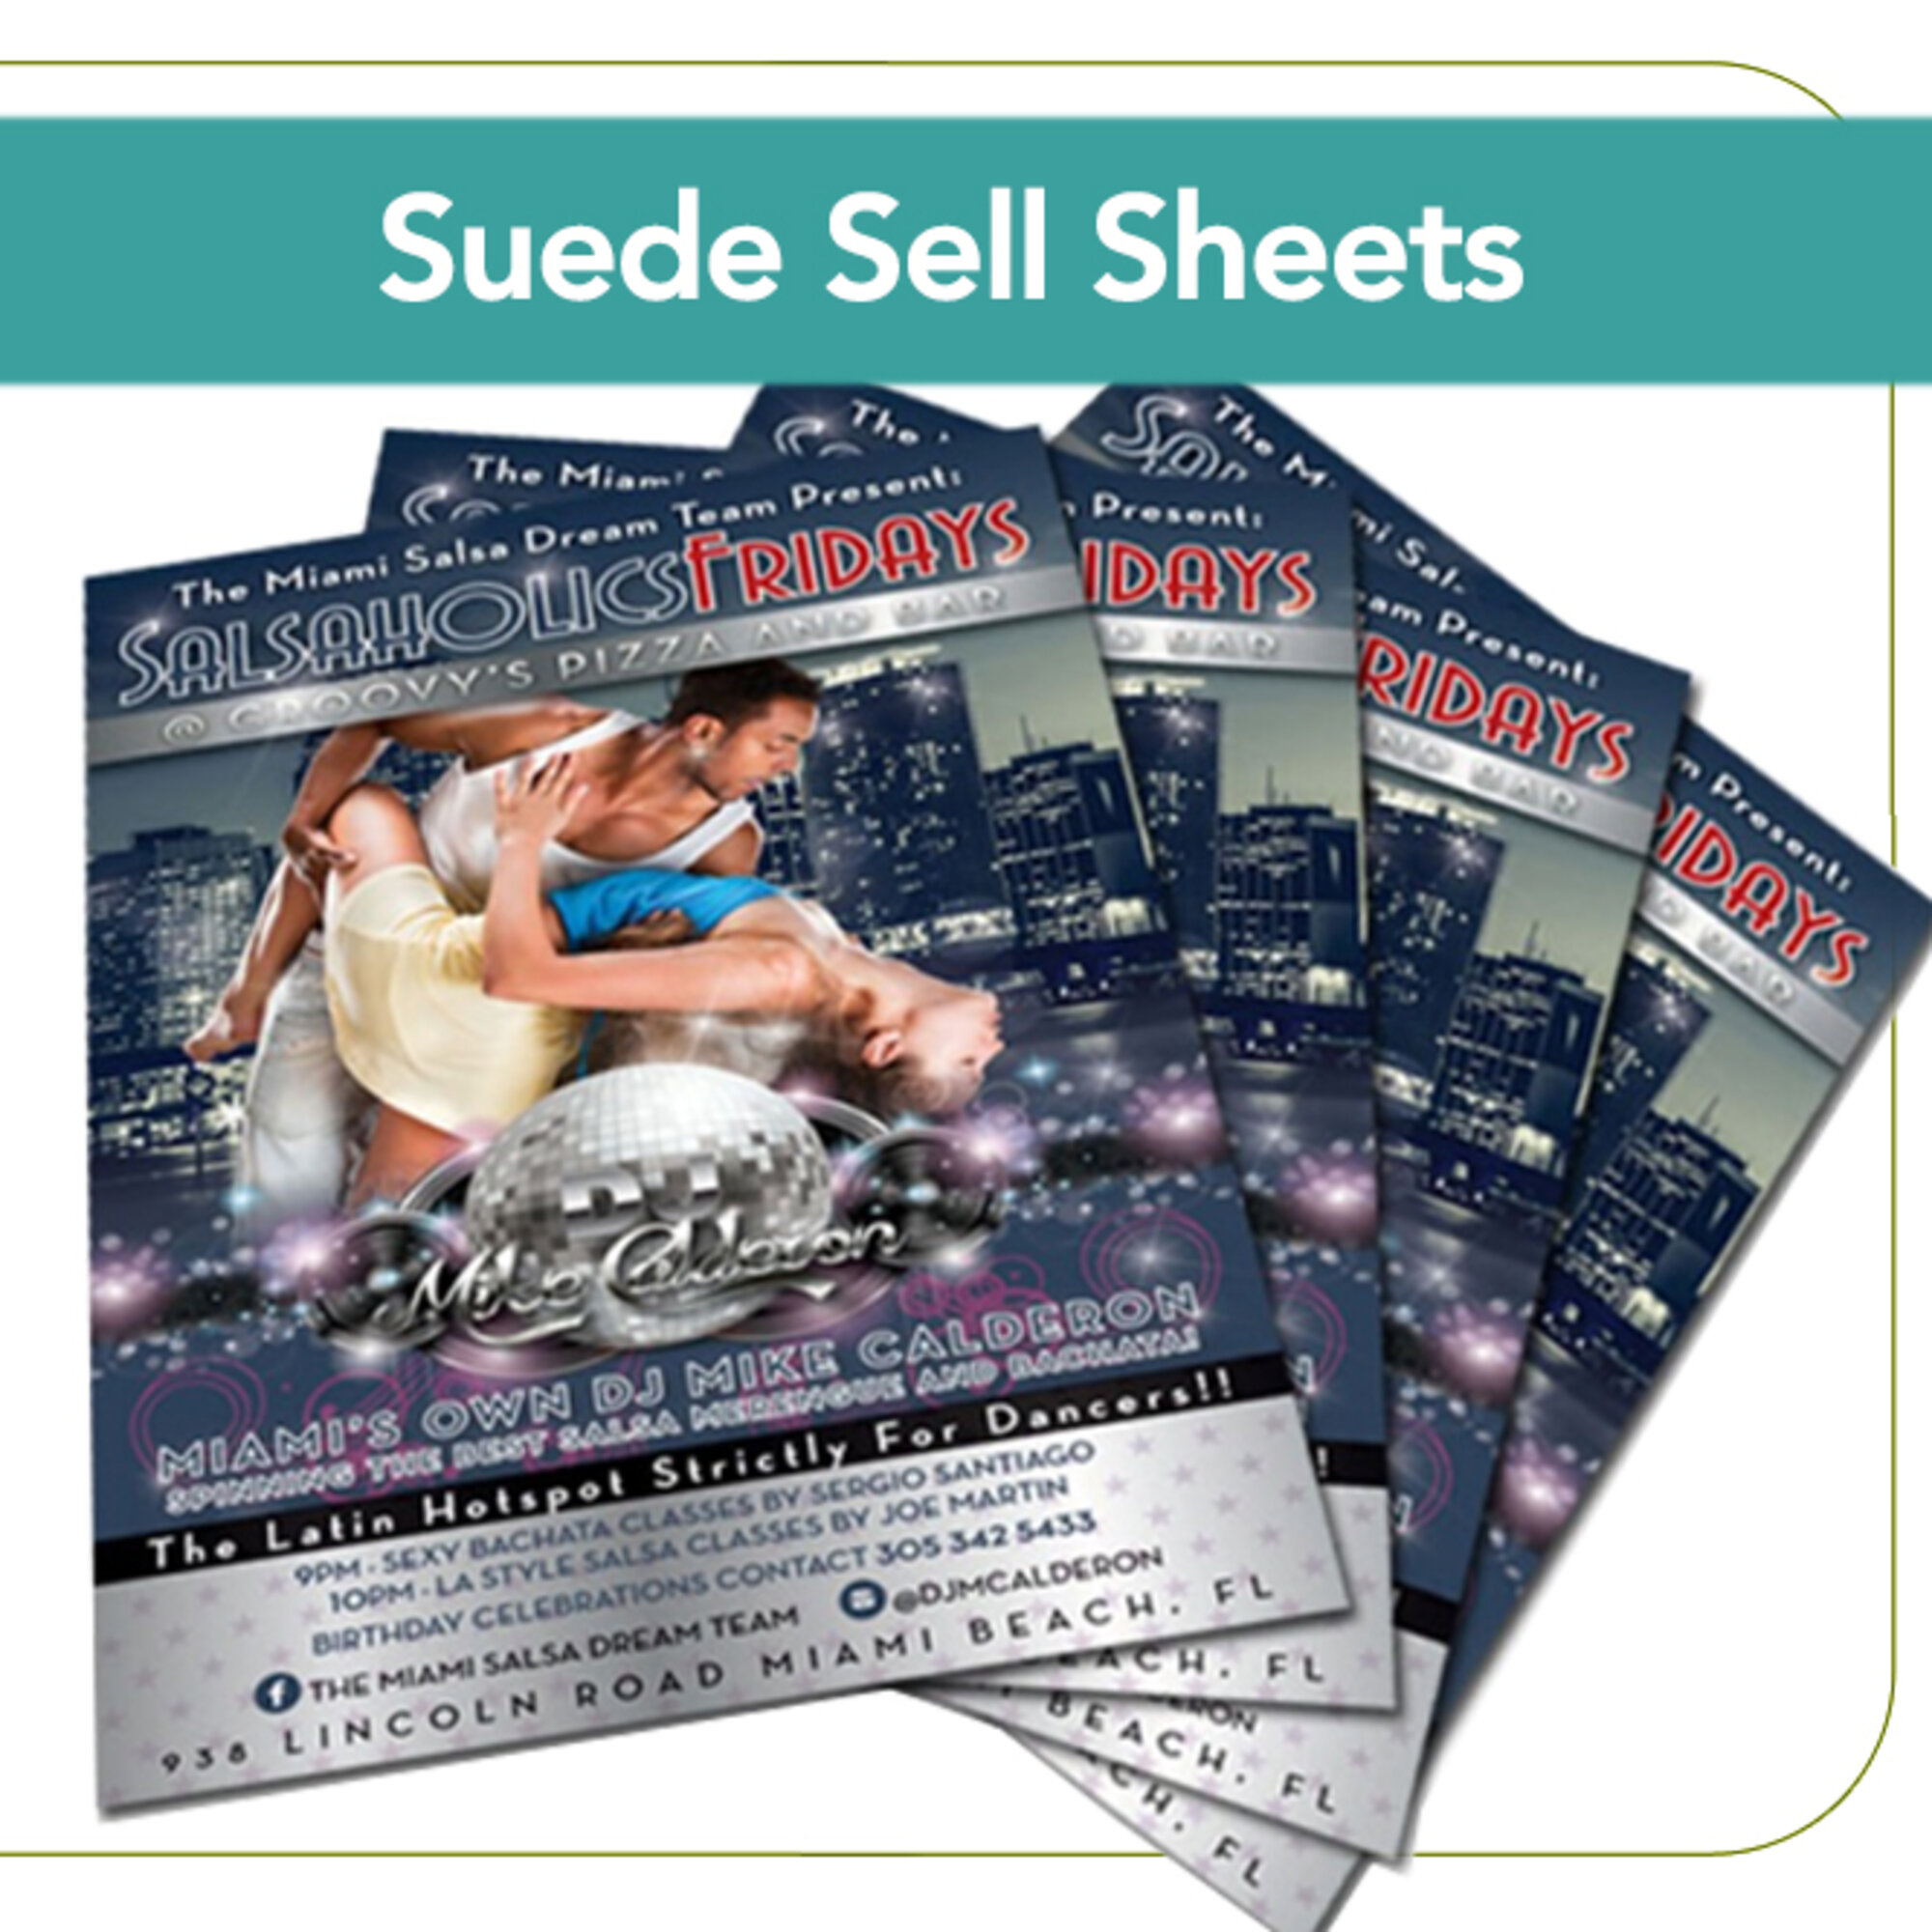 Suede Sell Sheets